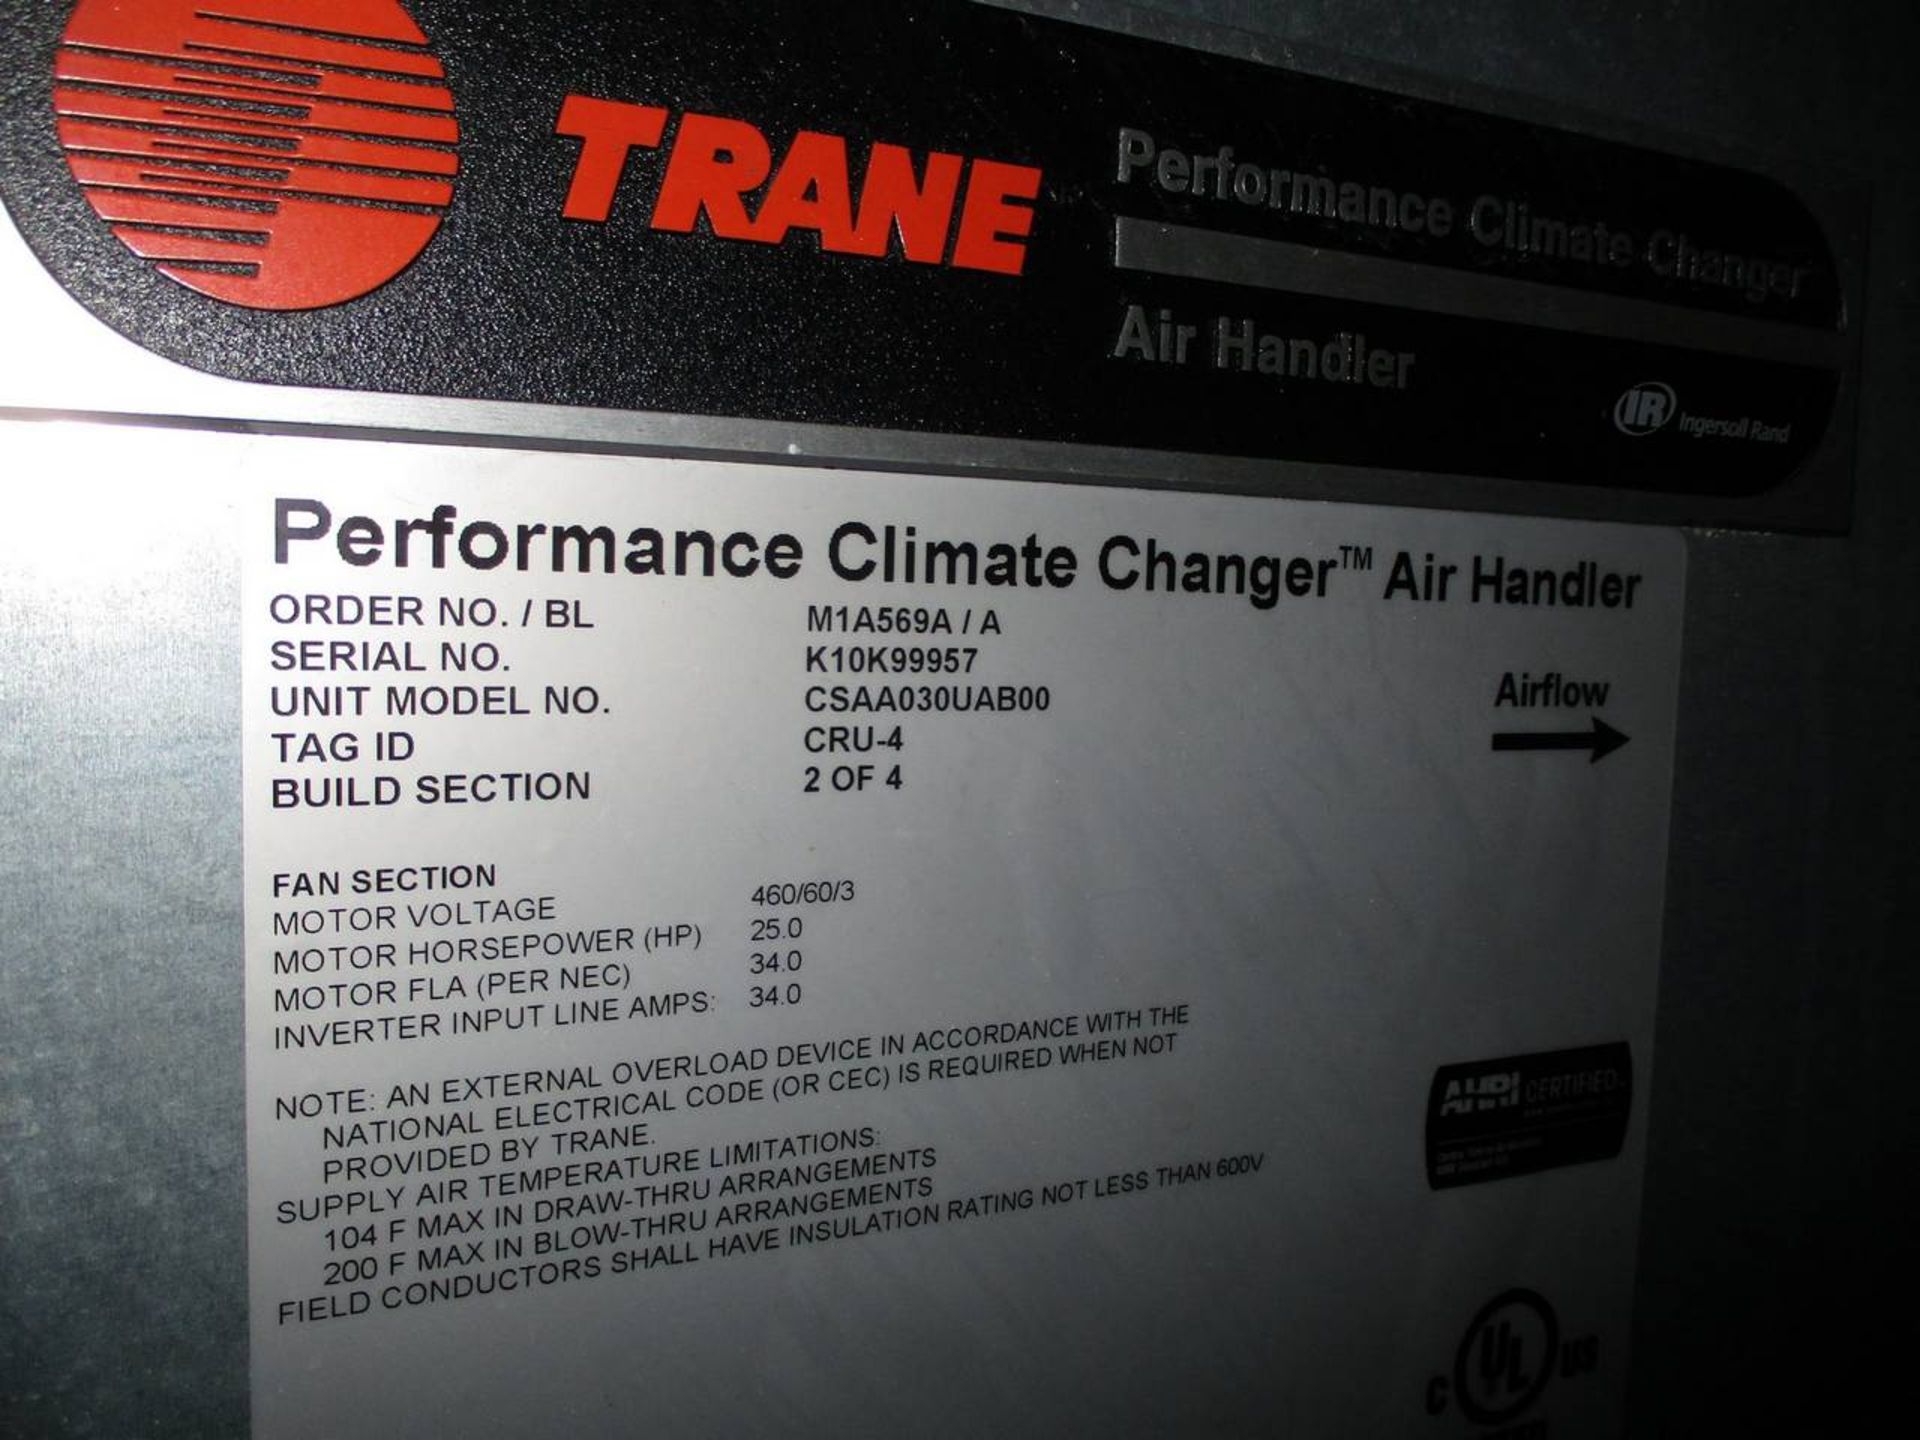 2010 Trane Performance Climate Changer Air Hander - Image 5 of 6